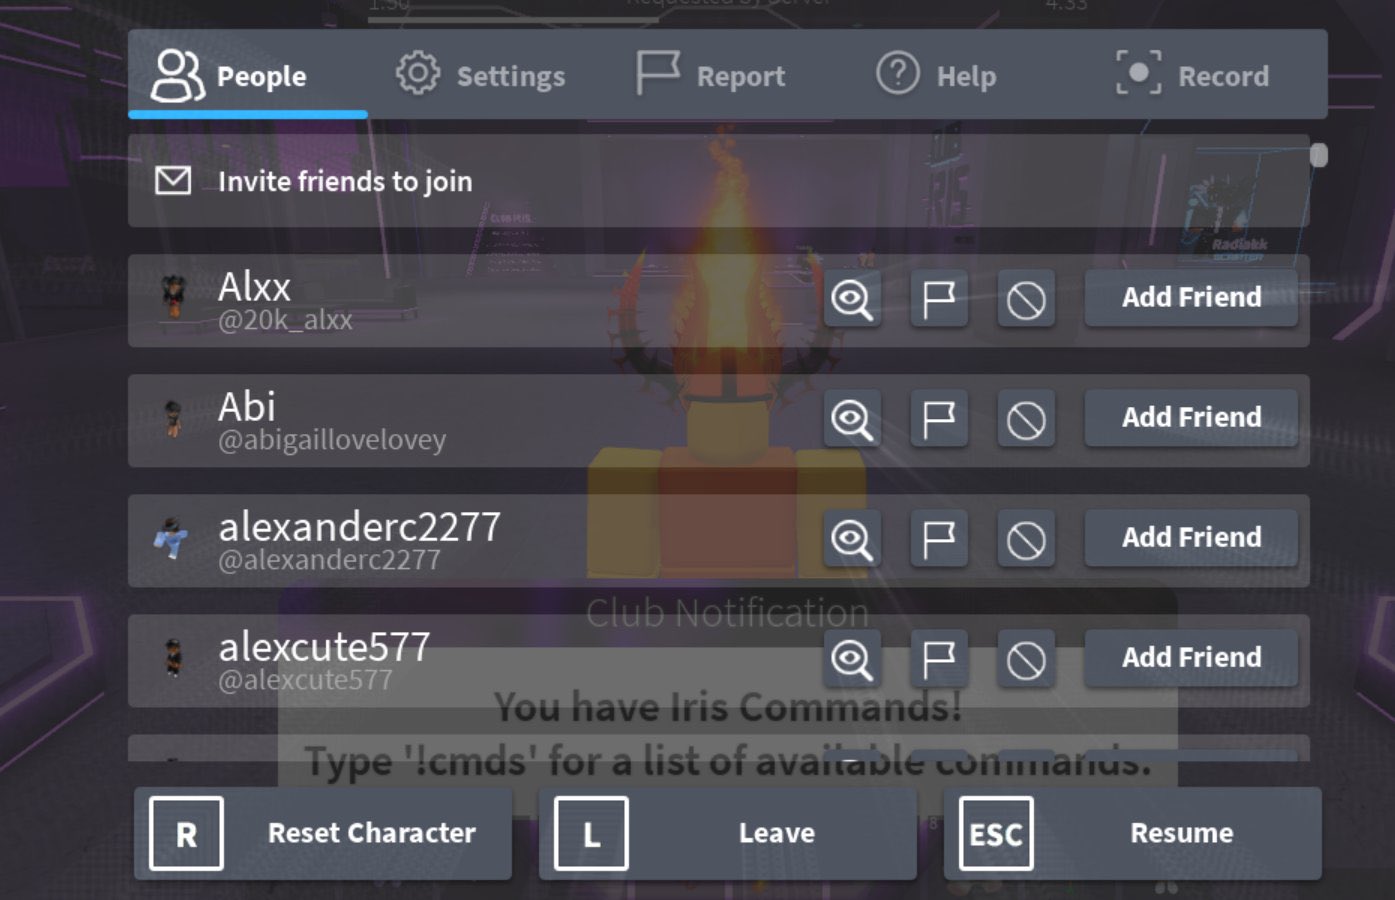 RTC on X: 🔲 Roblox is in fact testing a QR code feature JUST like  Snapchat, where you can scan another player's code to friend them on Roblox  - & check out